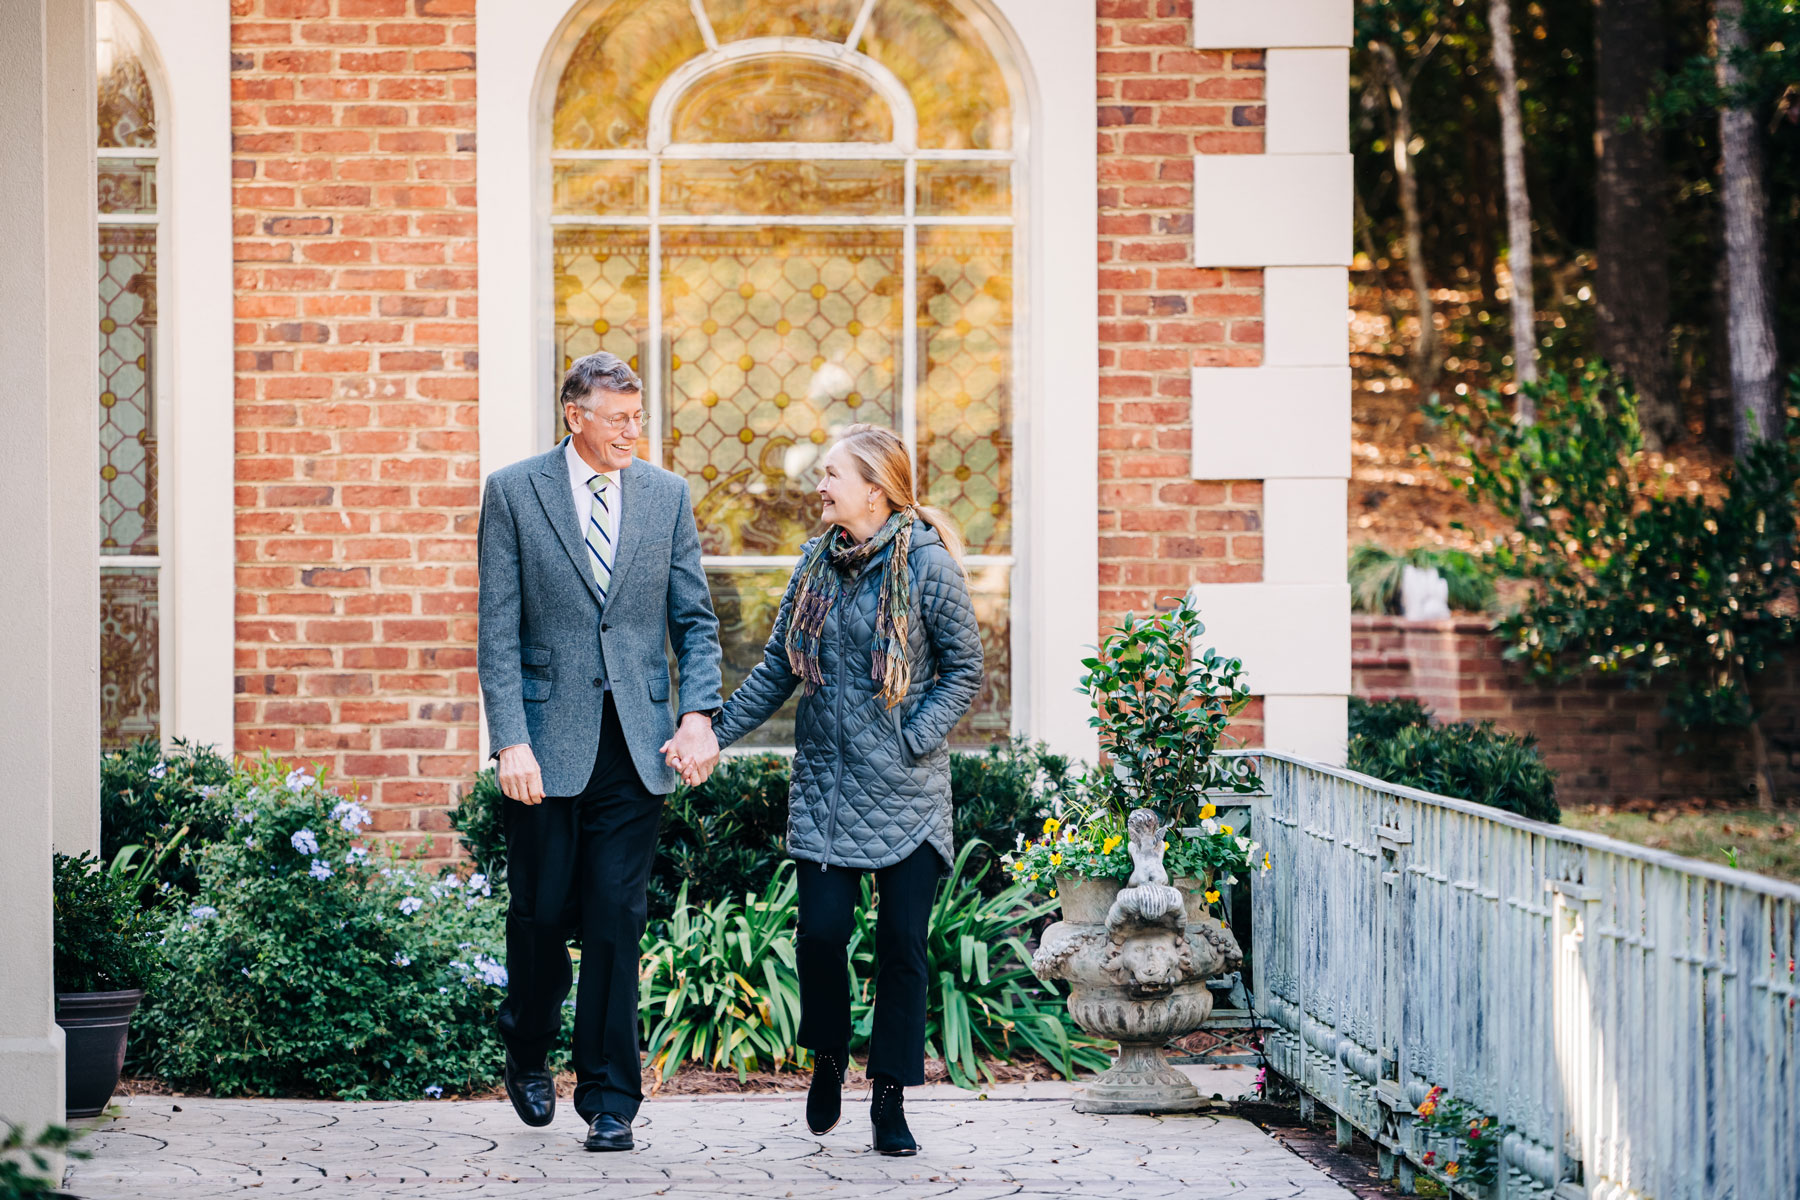 Marnix and Mary Heersink smile at each other as they walk hand-in-hand outside a large brick home.